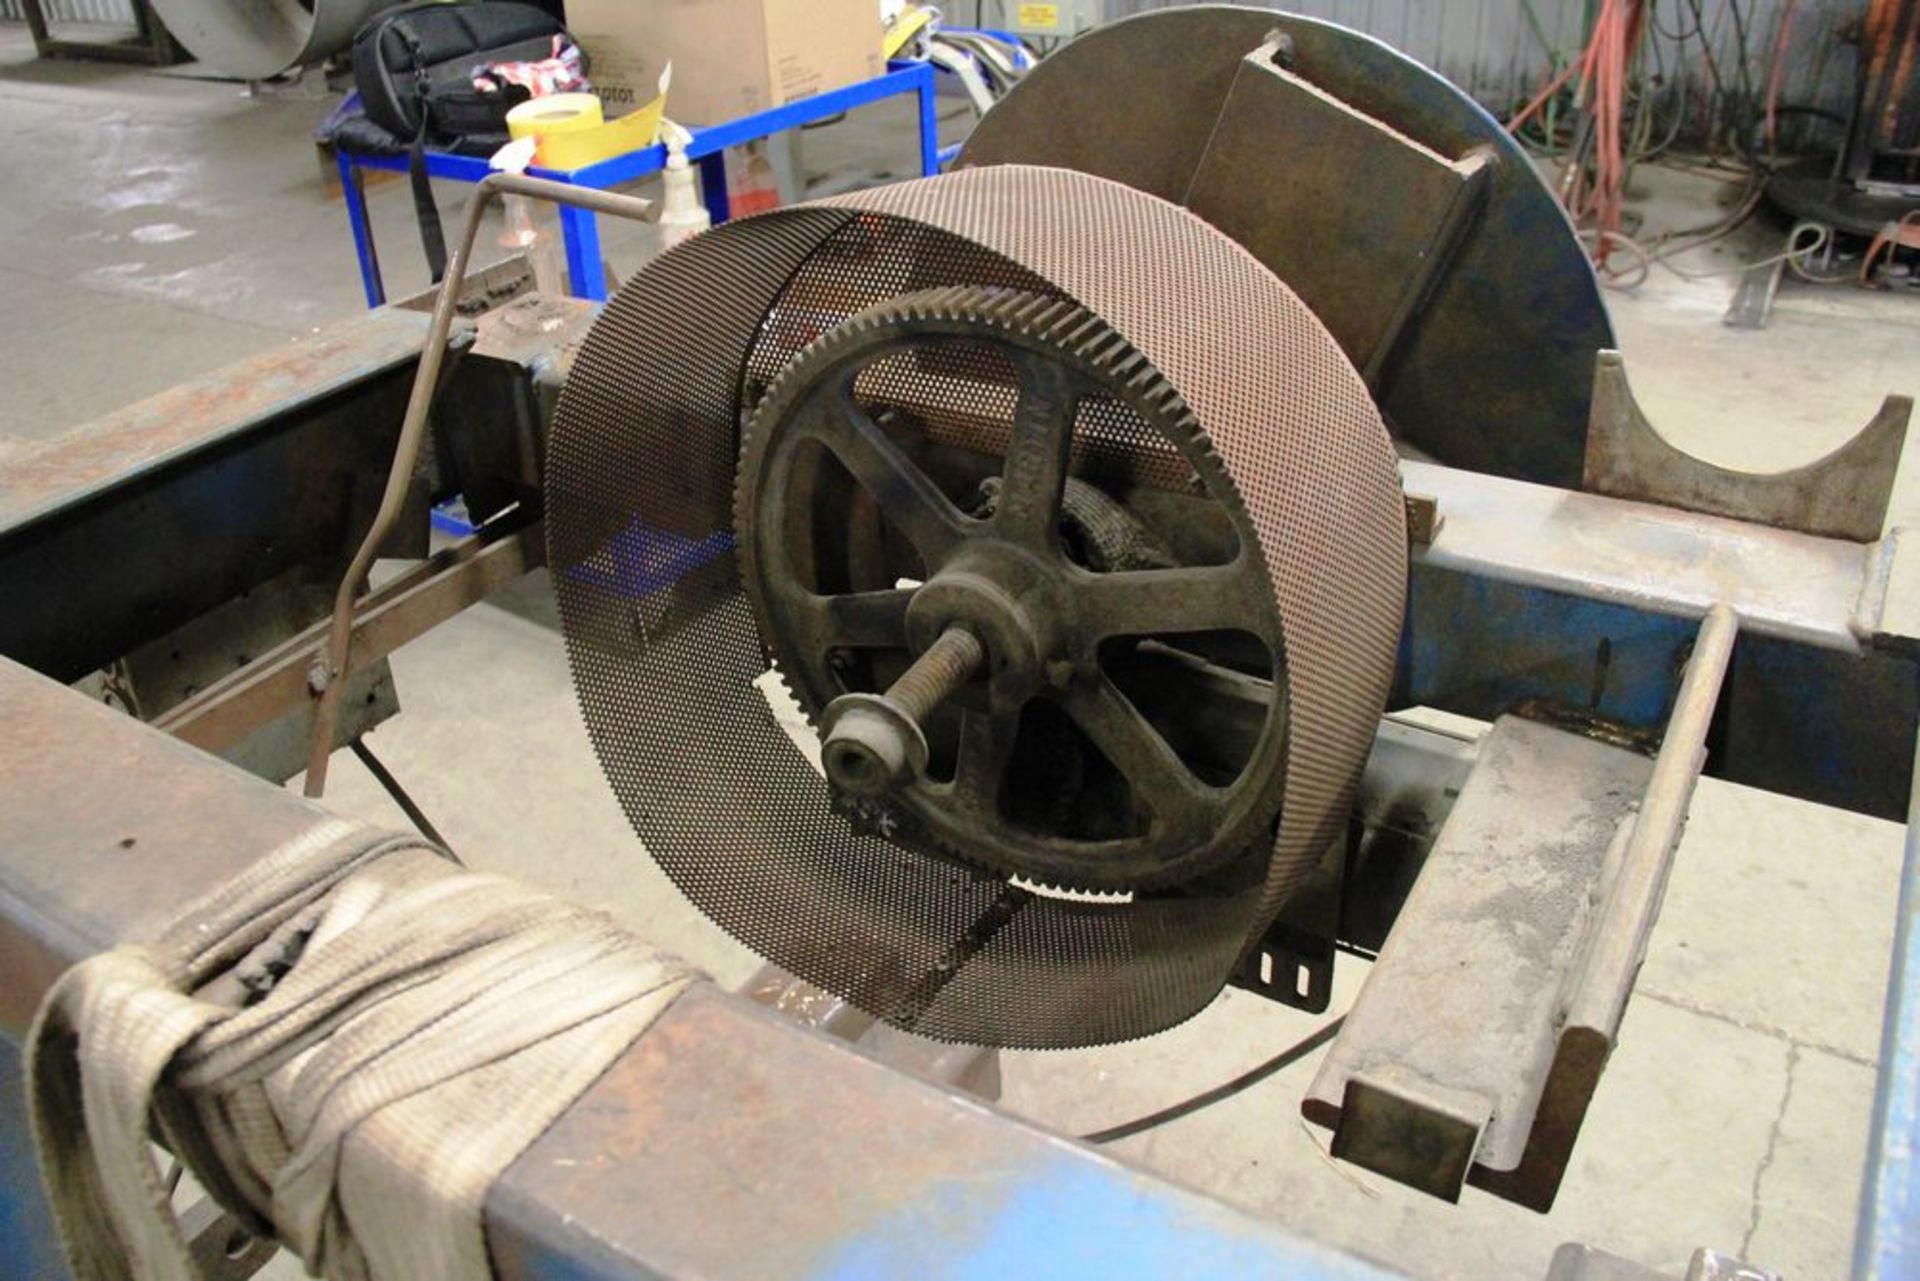 CUSTOM BUILT WELDING POSITIONER, 21" FACE PLATE, 10" 3 JAW CHUCK, FOOT CONTROLLER (NOTE: GEAR - Image 3 of 4